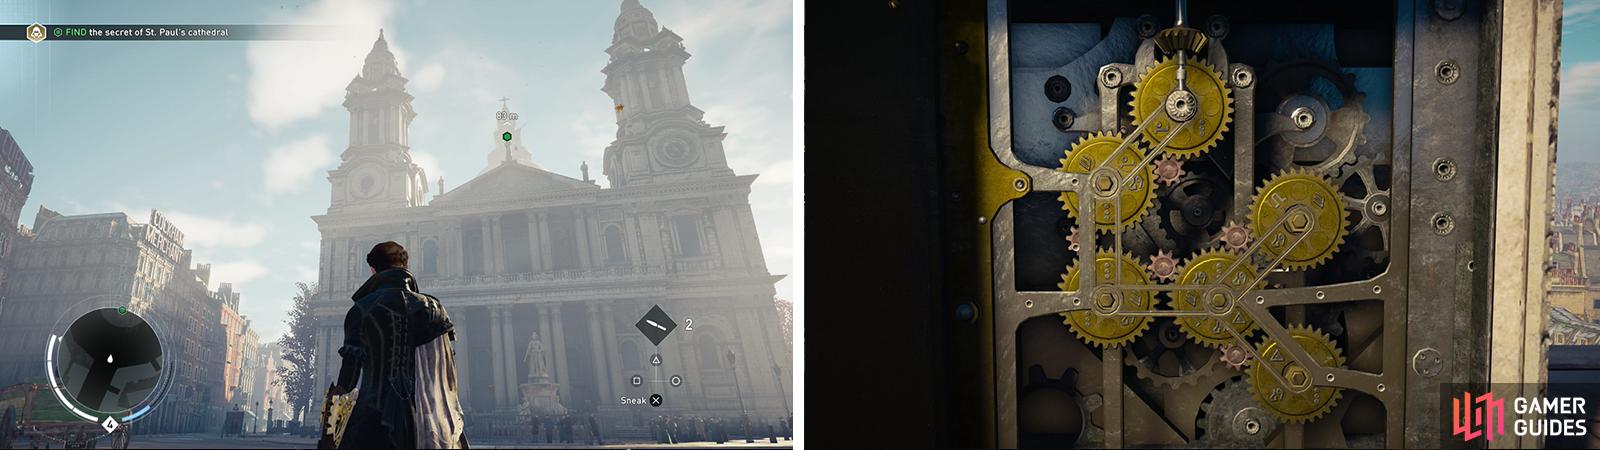 Climb to the top of St. Paul's (left) to locate a puzzle. Rotate the gears until you reach the solution pictured (right).